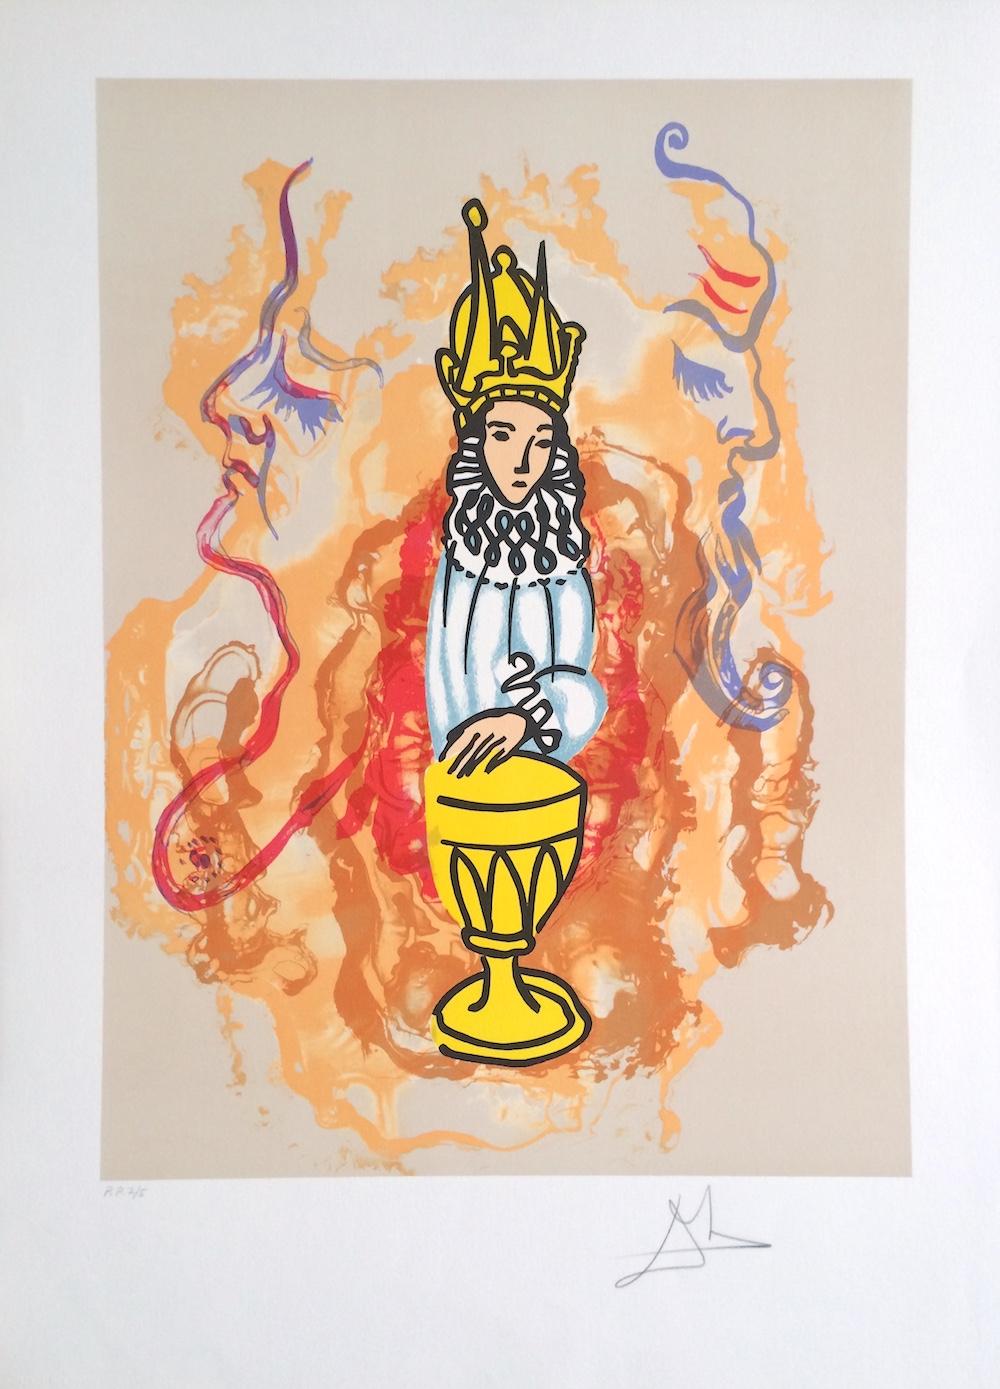 PRINCE OF CUPS 1979, Signed Lithograph on Arches, Tarot Card Series - Print by Salvador Dalí